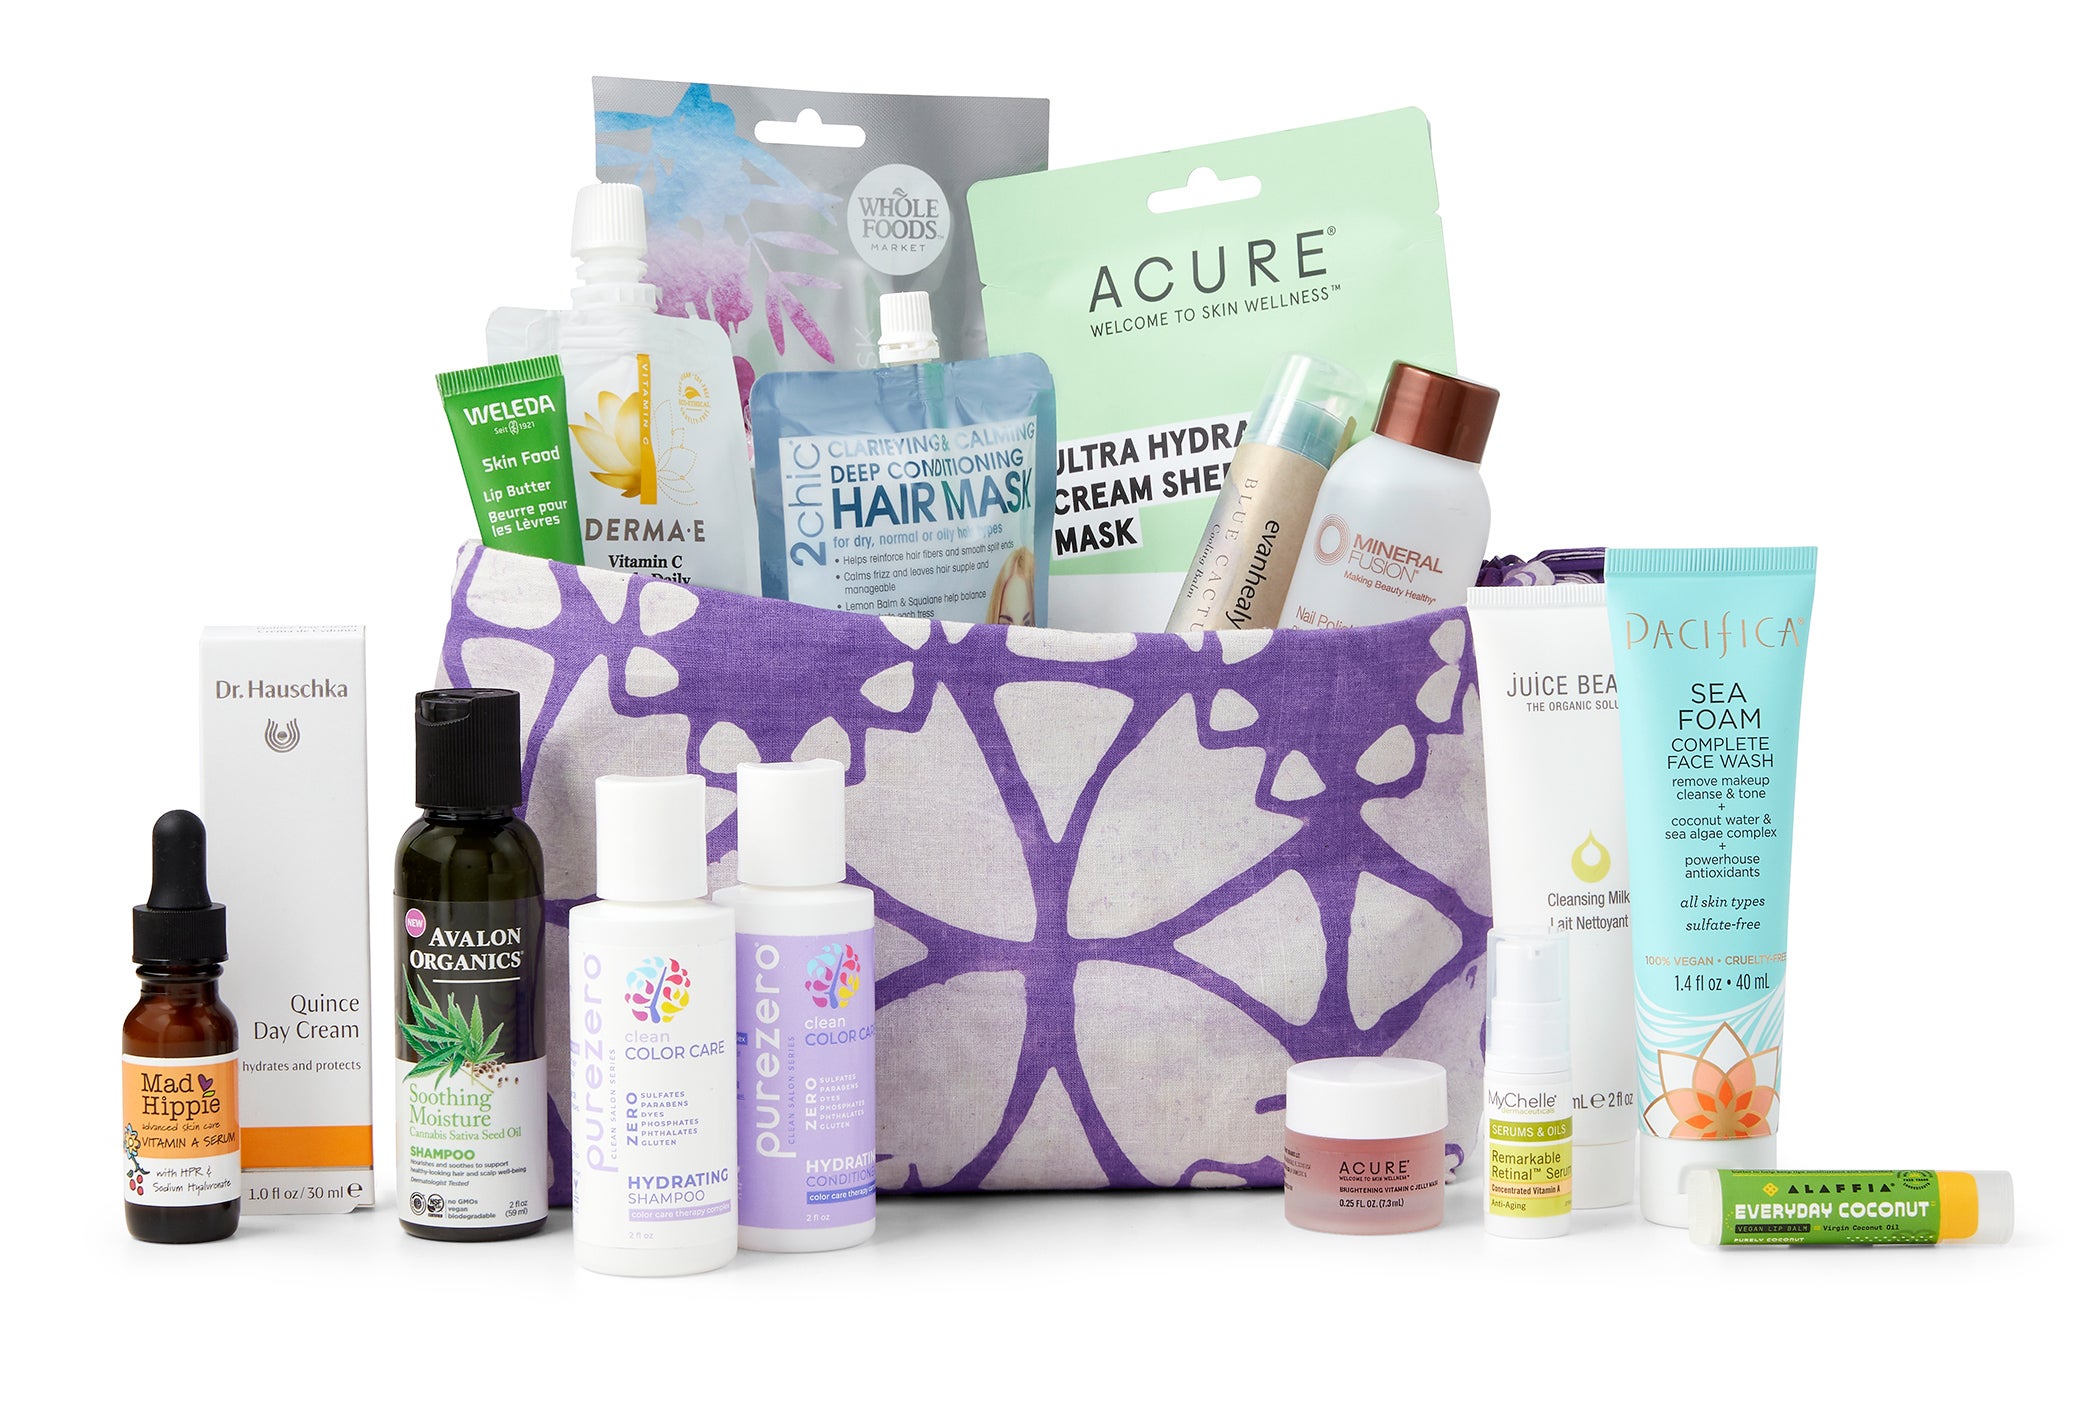 Whole Foods Beauty Week Deals Are Back